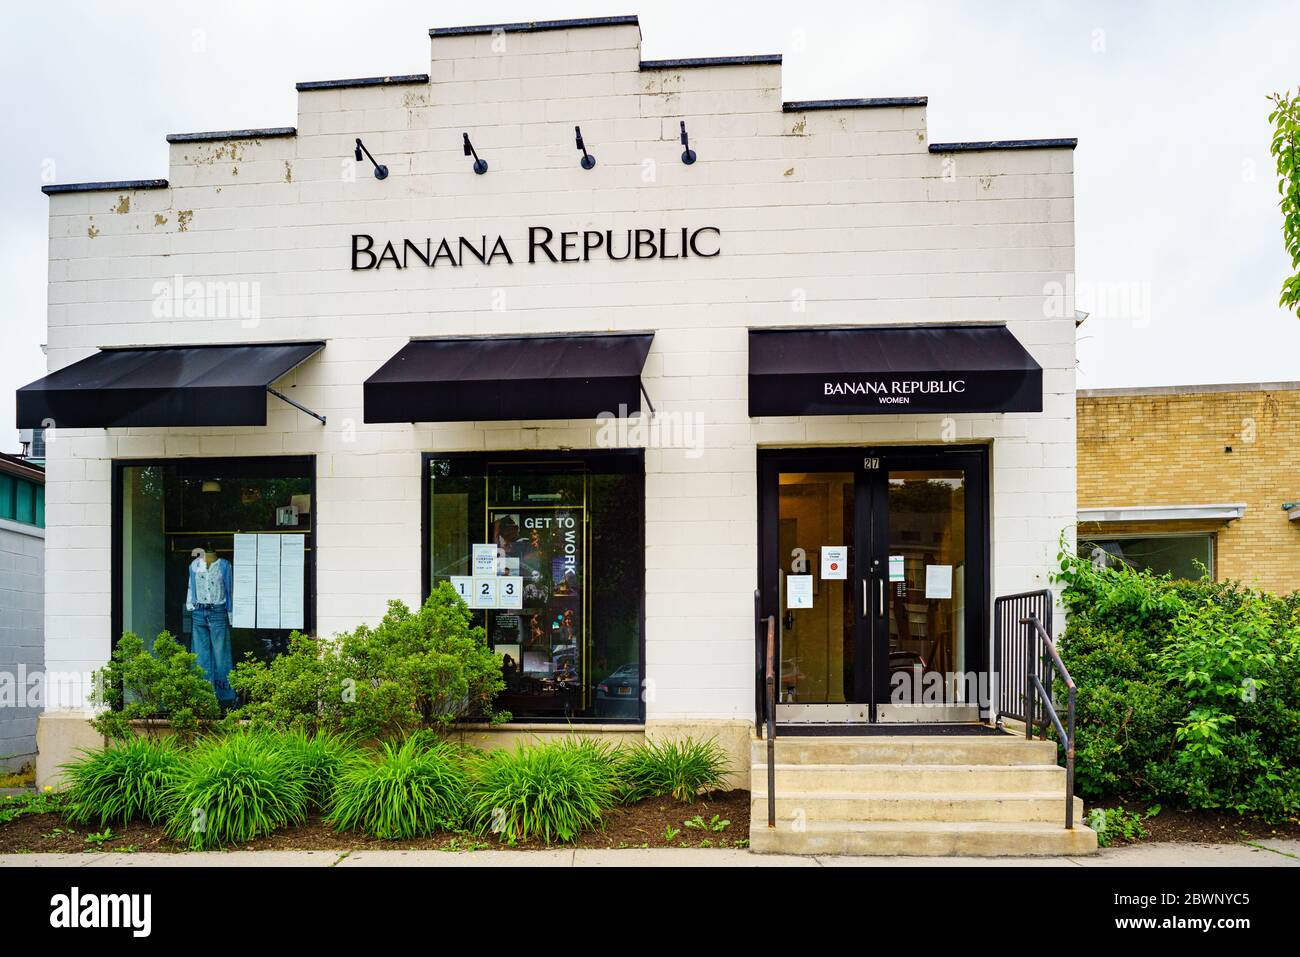 Mt. Kisco, New York May 29, 2020: As Westchester County NY begins Phase 1 of its limited reopening after the coronavirus pandemic, retail clothing stores such as Banana Republic provide curbside pickup due to the need for continued social distancing. Stock Photo